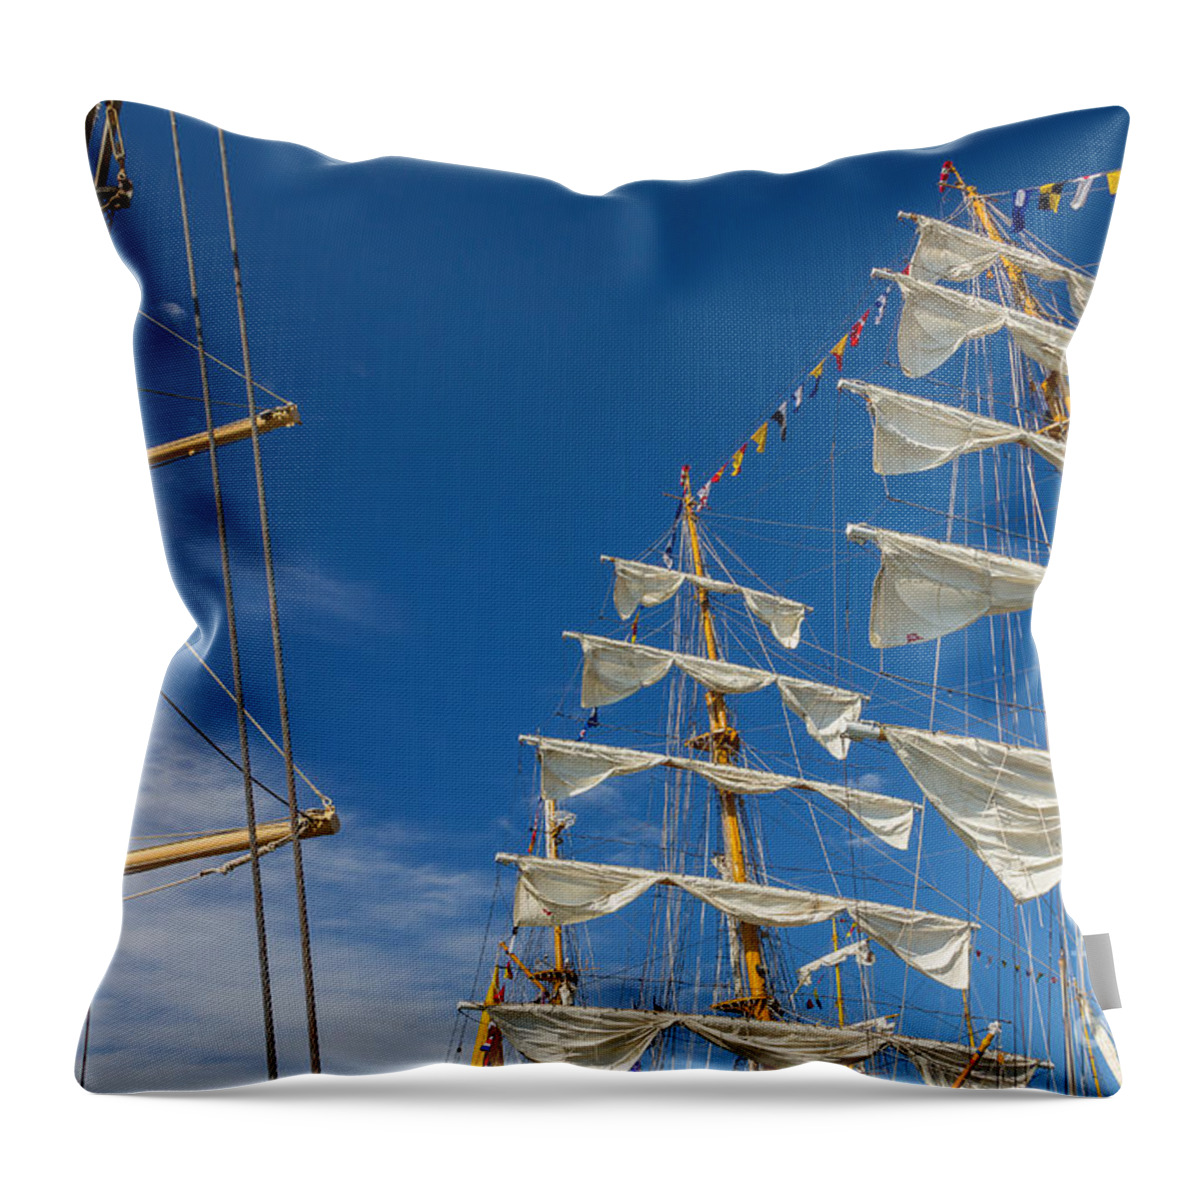 America Throw Pillow featuring the photograph Tall Ship Masts by Susan Cole Kelly